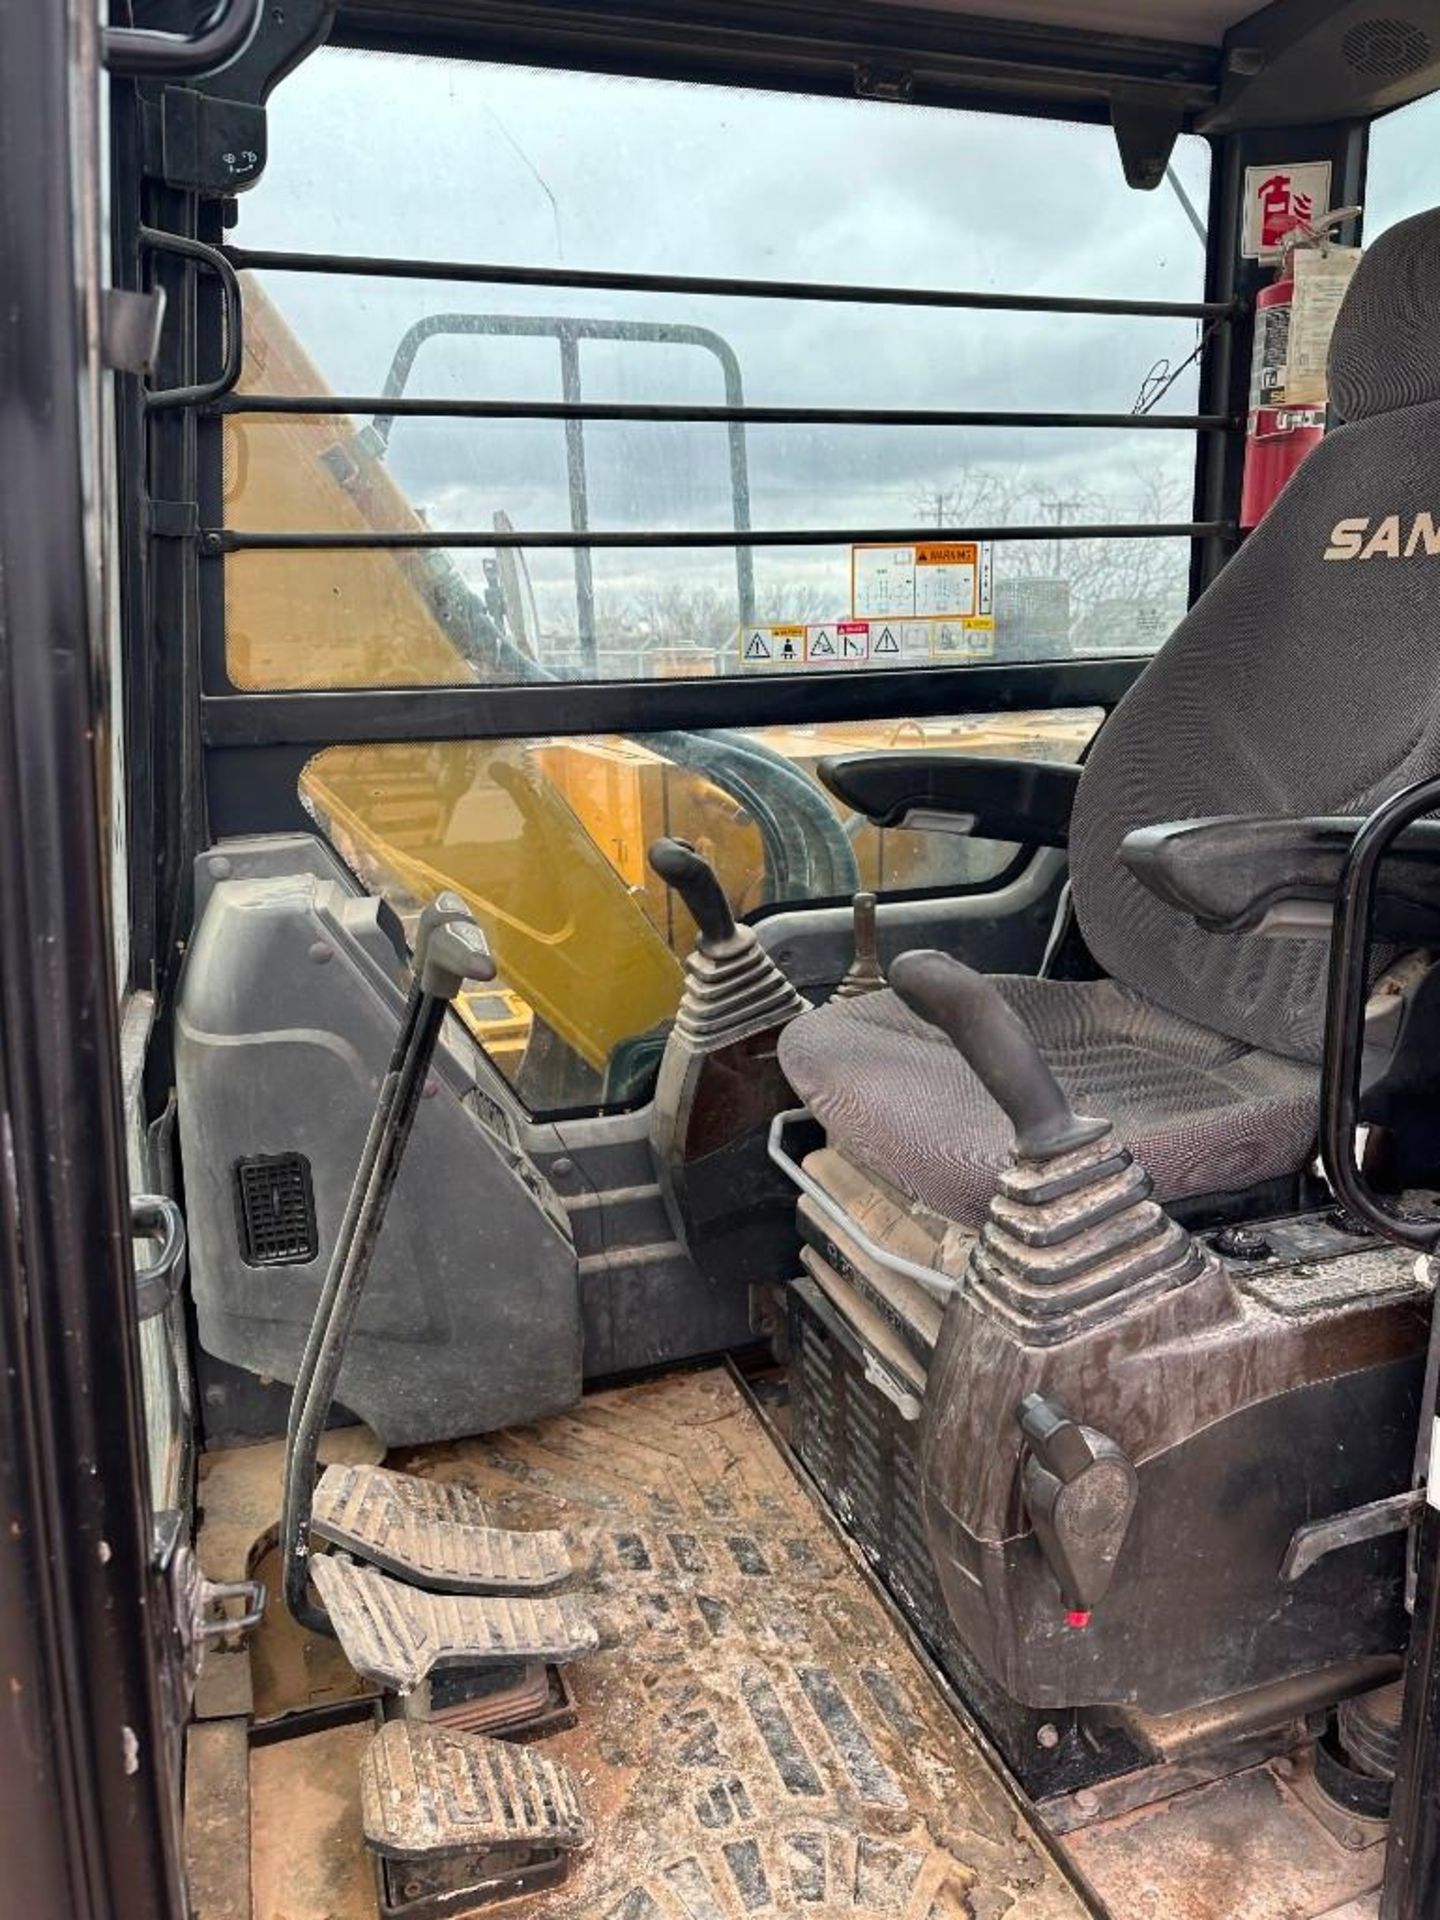 2019 Sany SY 95C Tracked Excavator, 2,309 Hours, 12" Tooth Bucket, Enclosed Cab, Diesel Engine, 8' H - Image 6 of 7